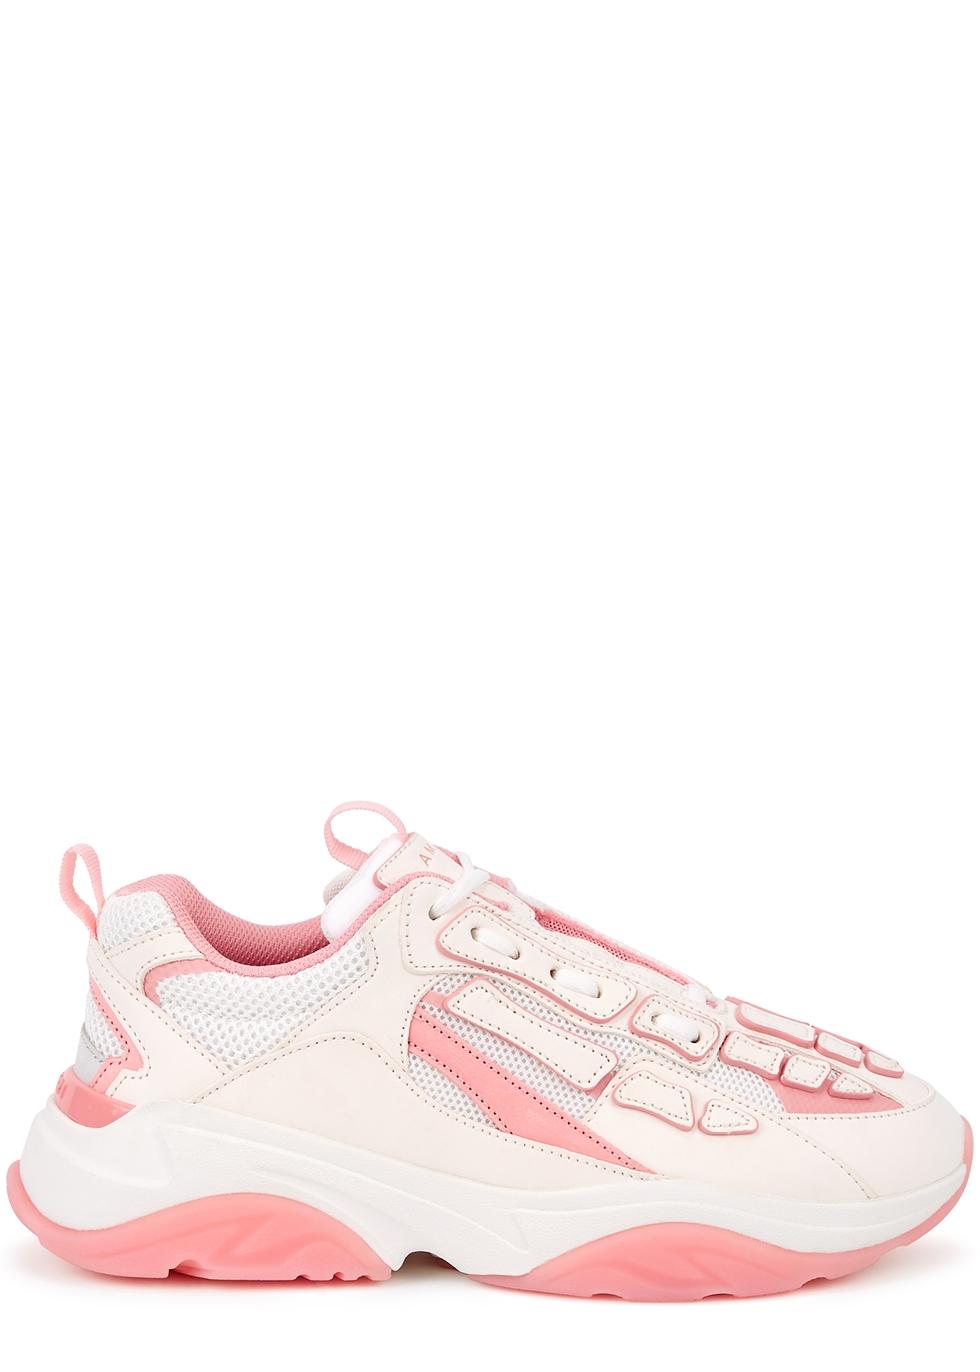 Amiri Bone Runner White And Pink Panelled Sneakers | Lyst